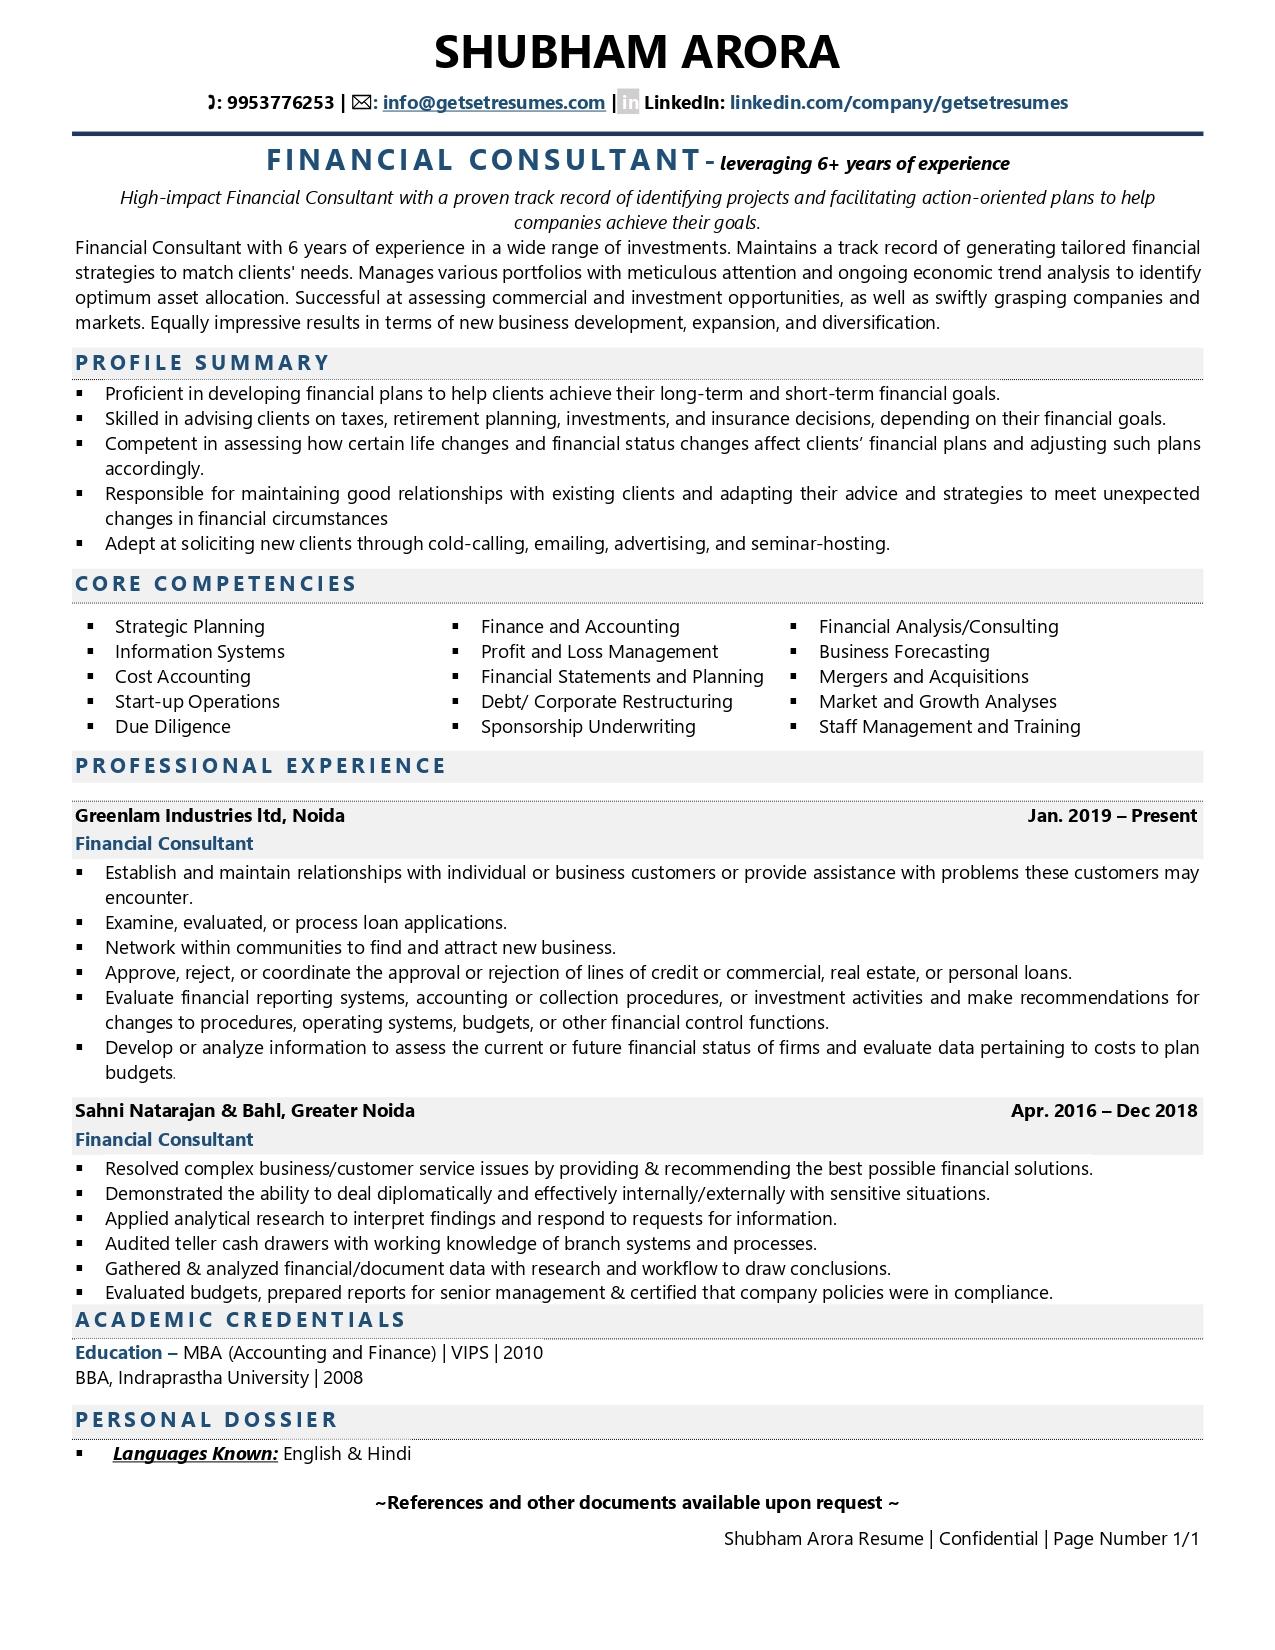 resume writing services financial industry